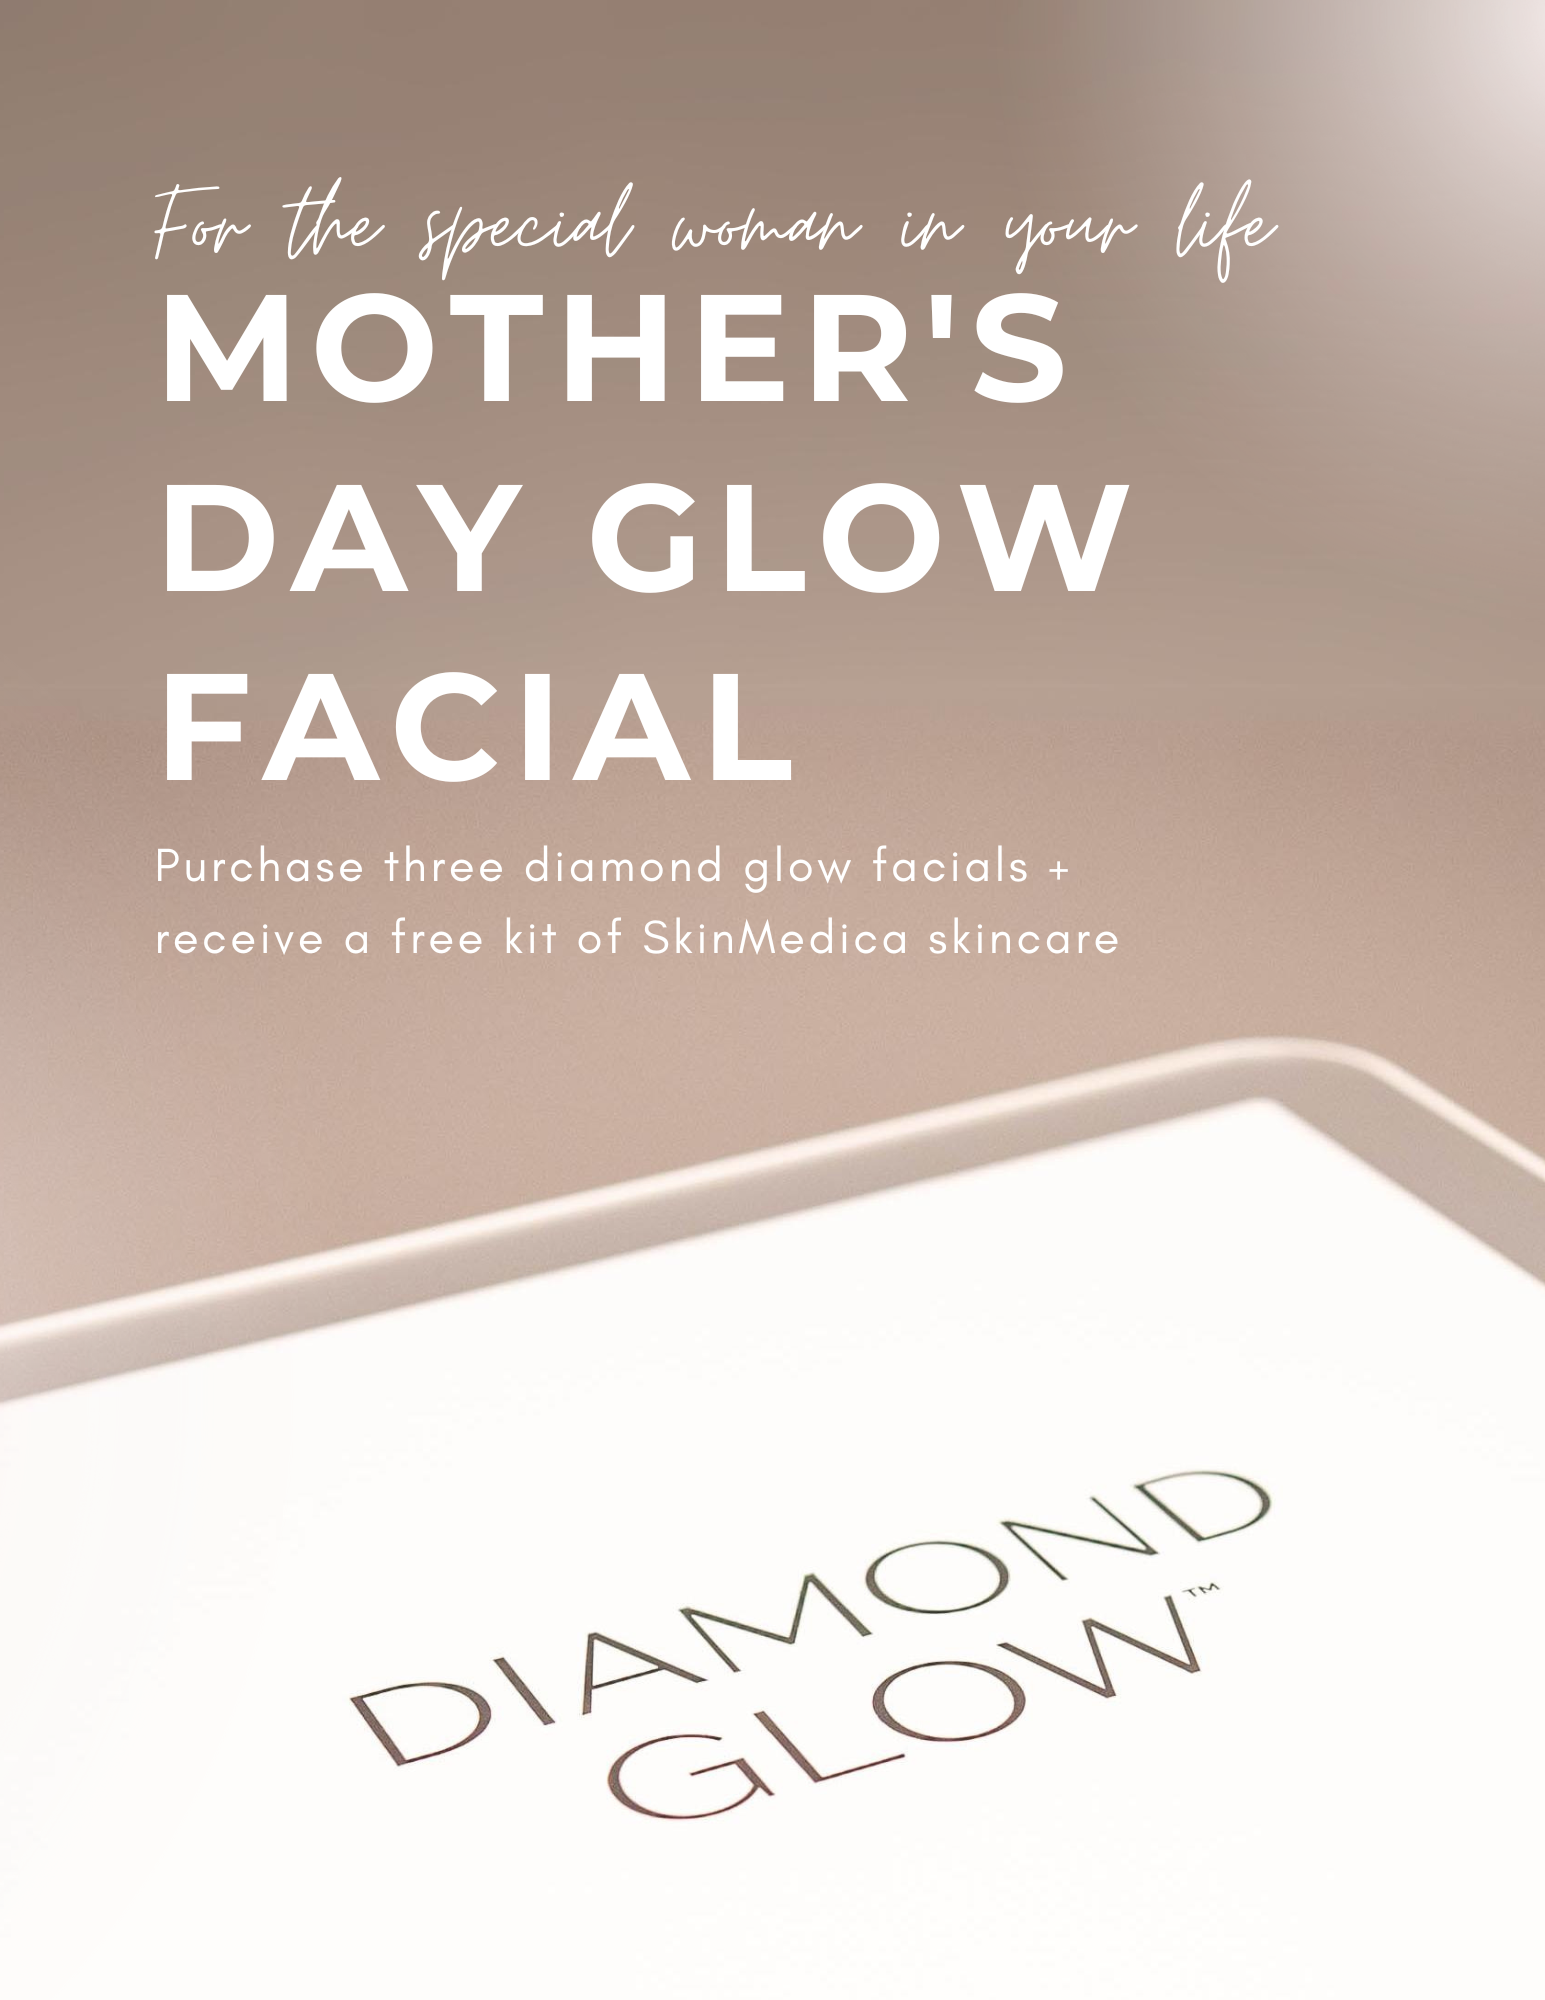 Mother's Day special offer from Awaken Medical Aesthetics